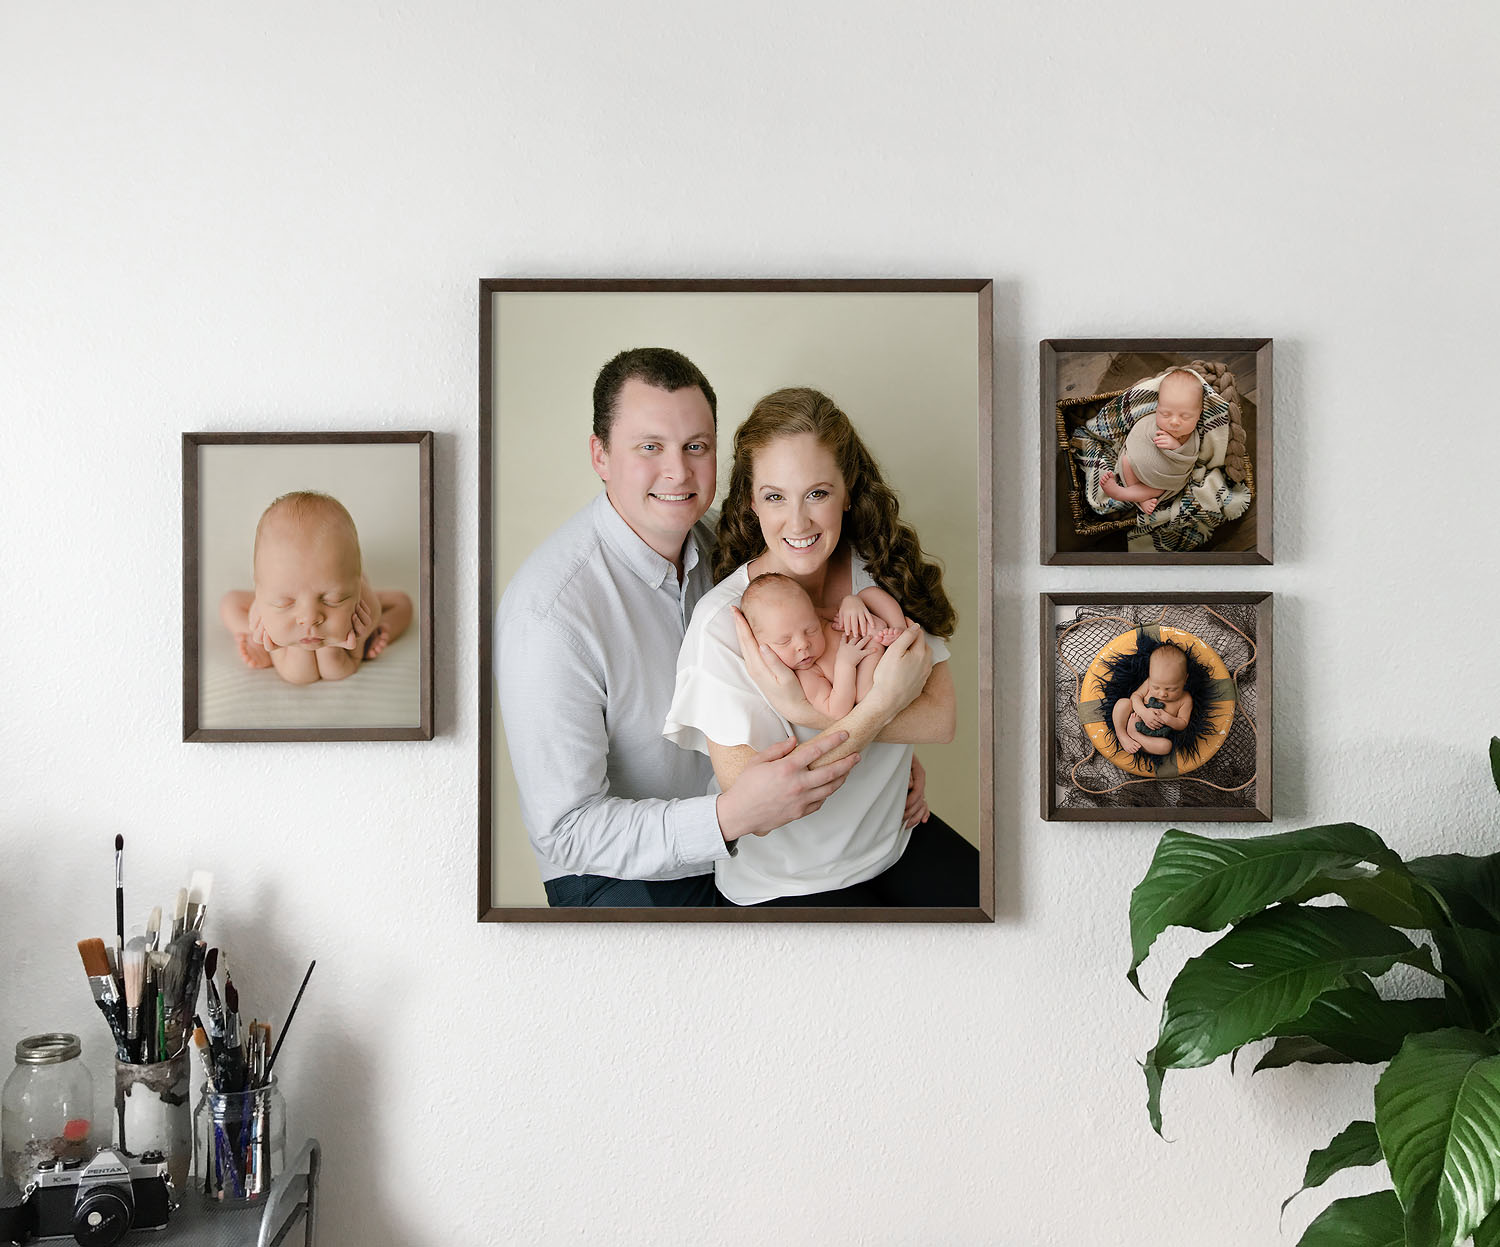 wall gallery of framed portraits of family with newborn in pembroke pines, fl